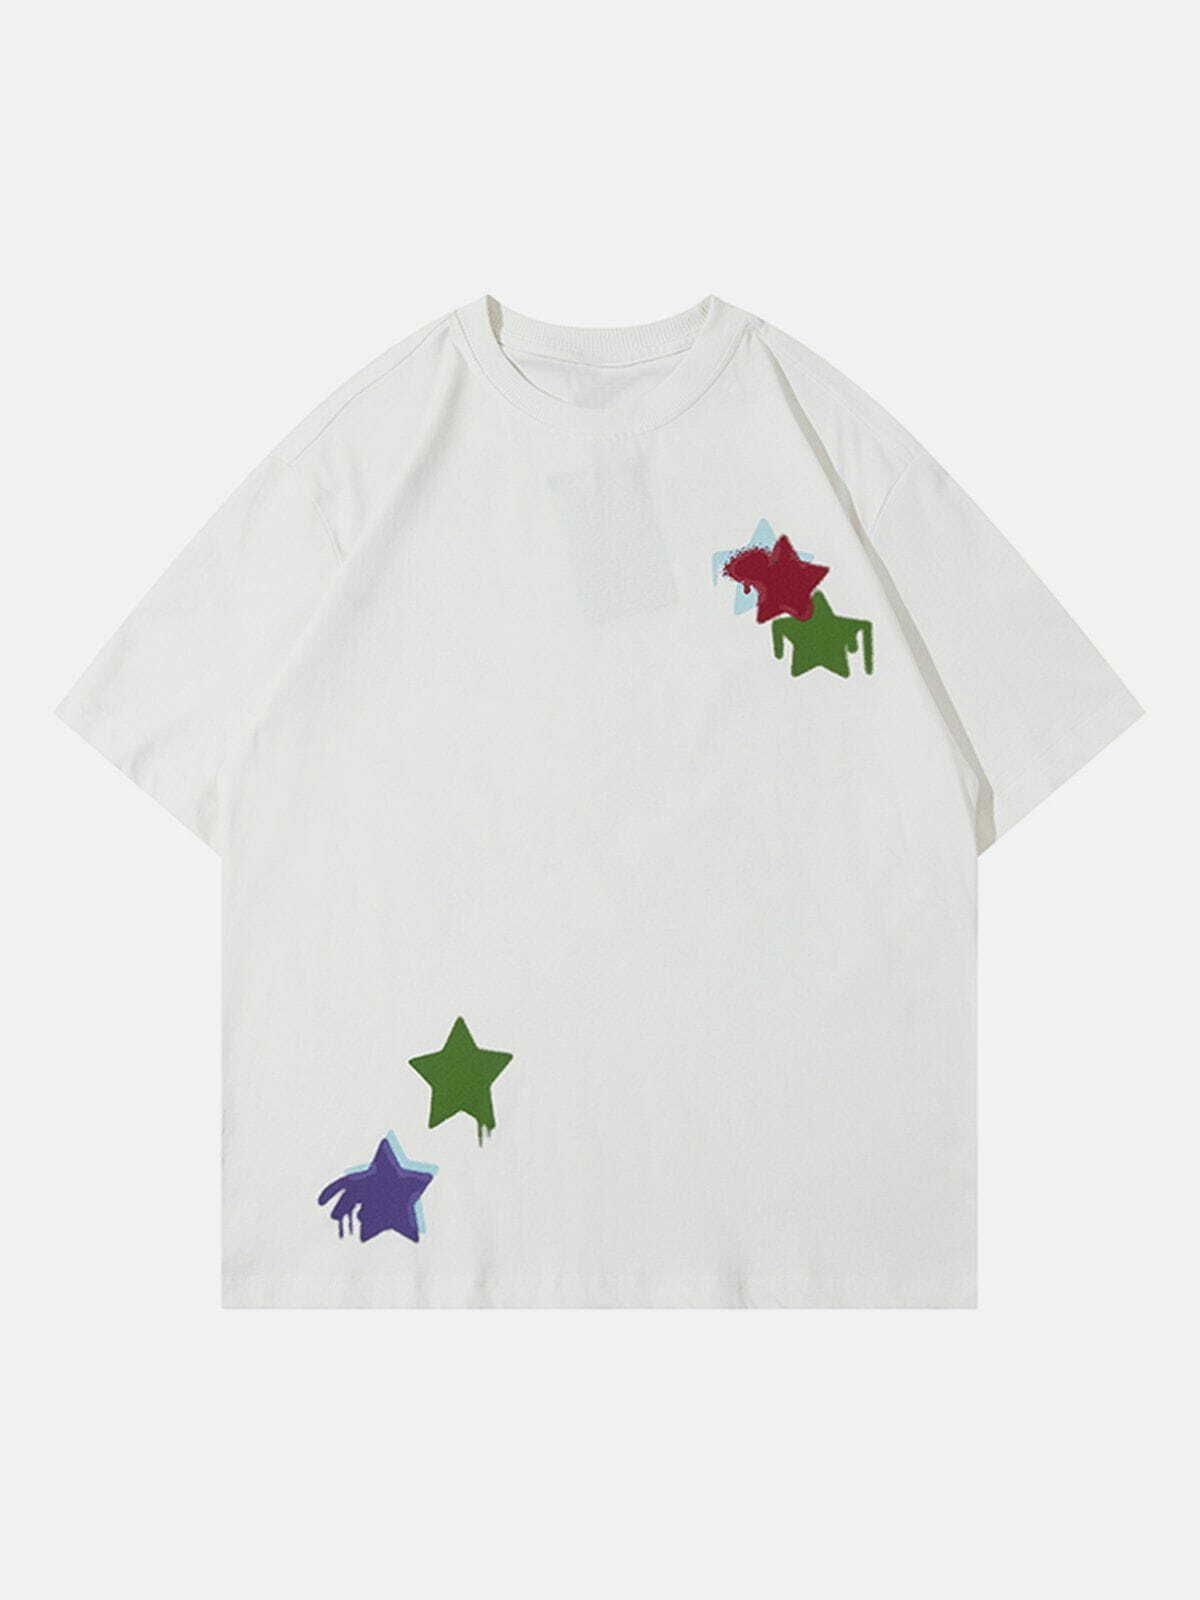 embroidered star tee edgy streetwear statement 8211